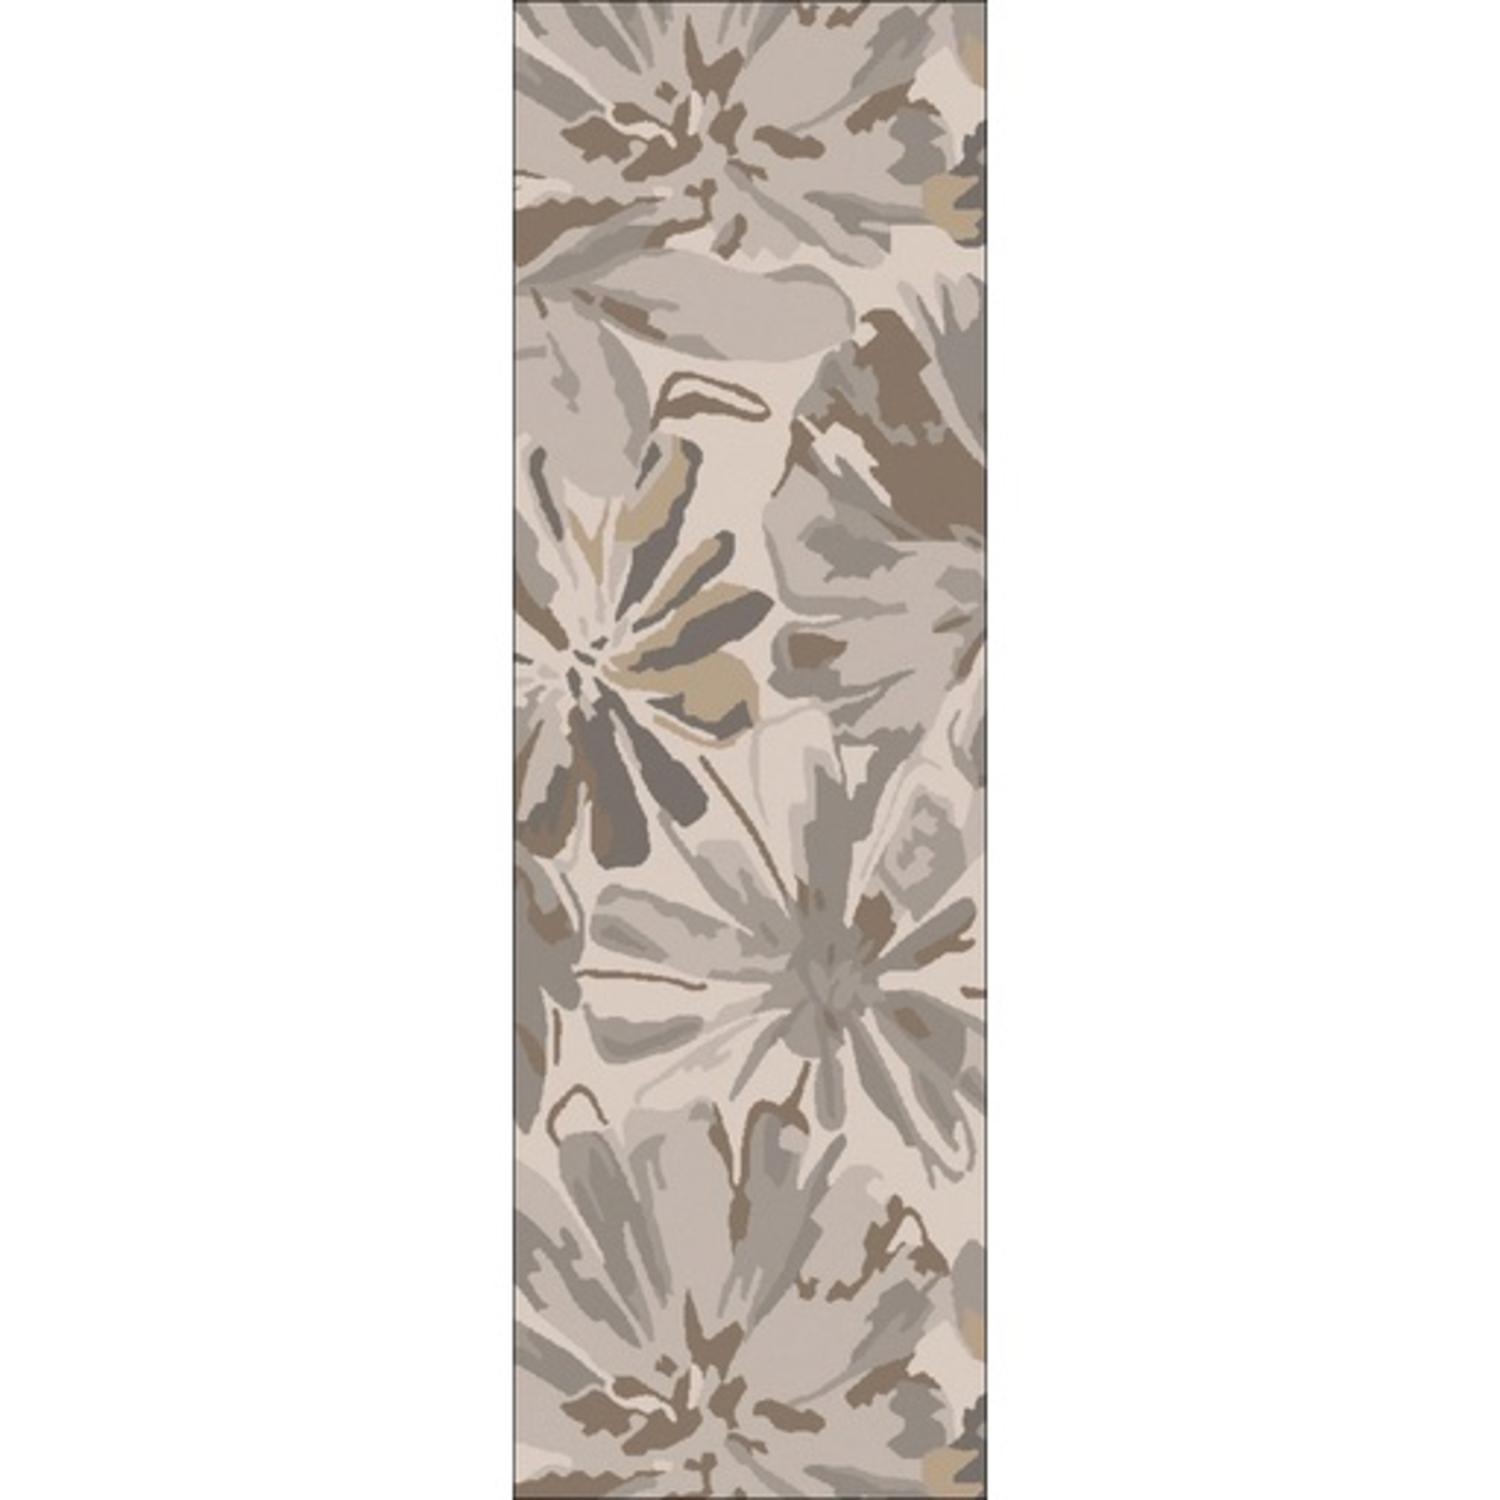 Diva At Home 2.5' x 8' Daisy Dream Gray, Brown and Beige Flower Hand Tufted Wool Area Throw Rug Runner